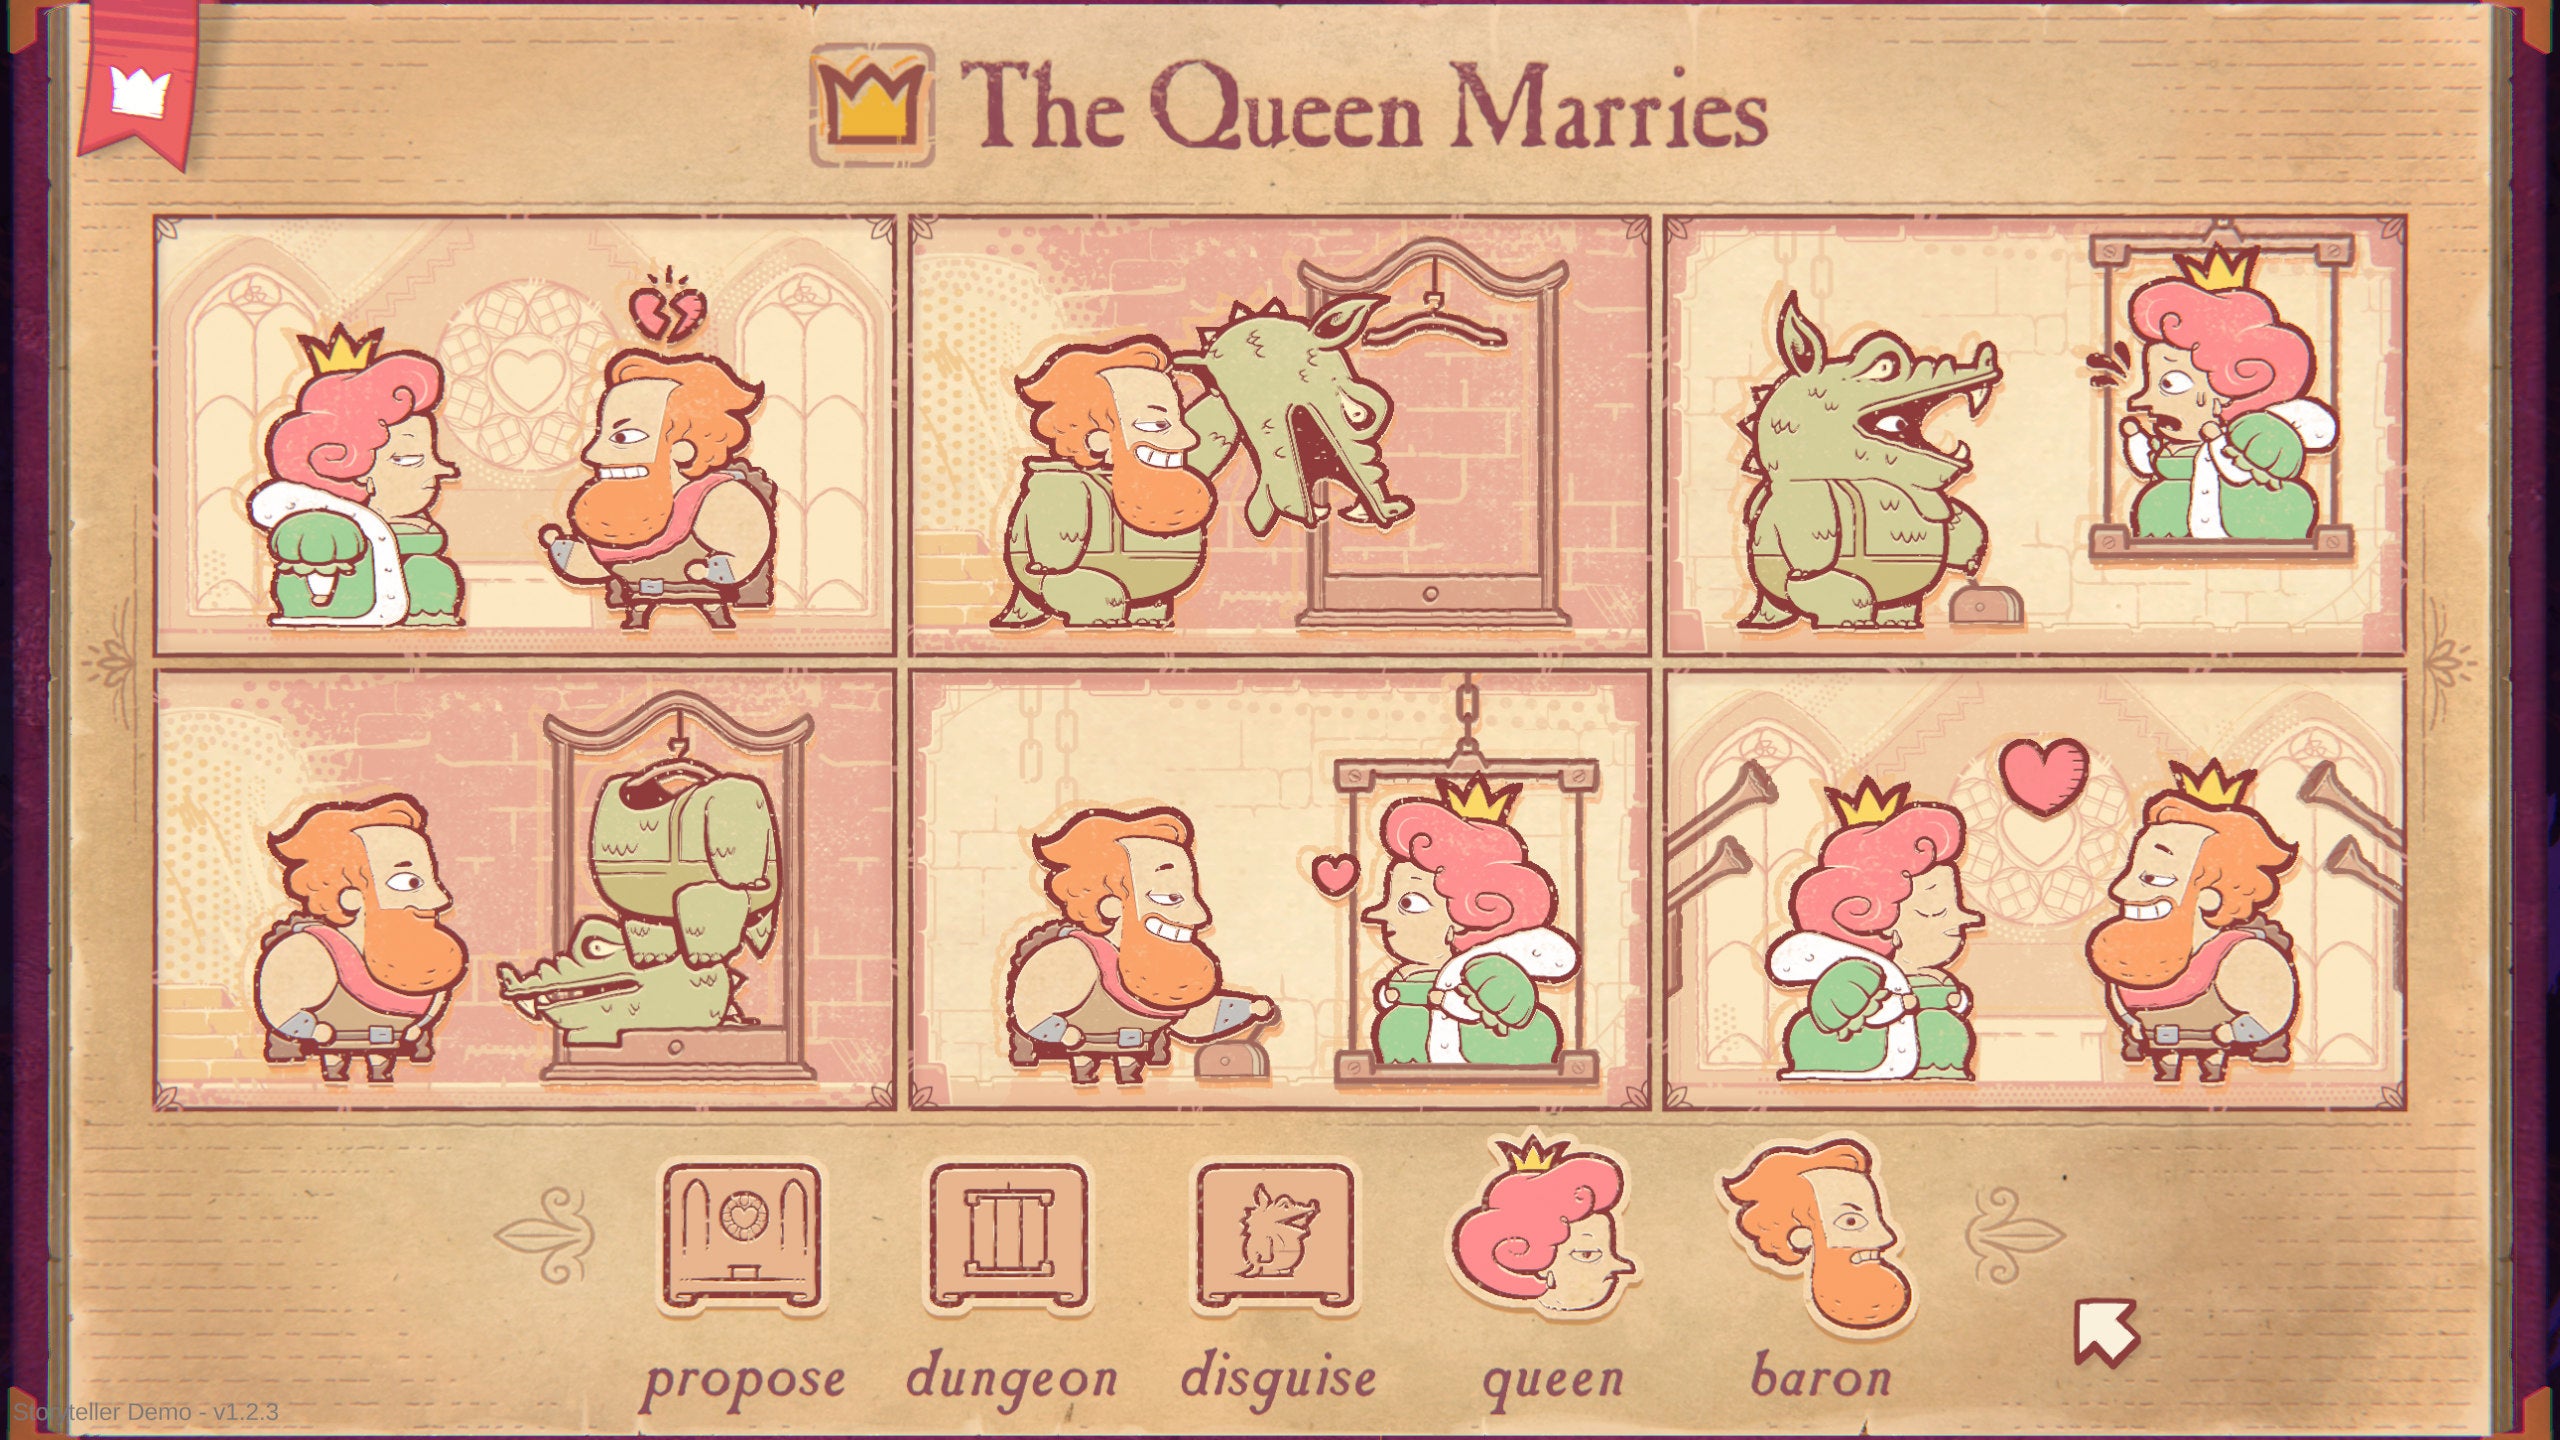 A Storyteller demo screenshot, showing a baron pretending to be a dragon and capturing the queen so he can later free and marry her.